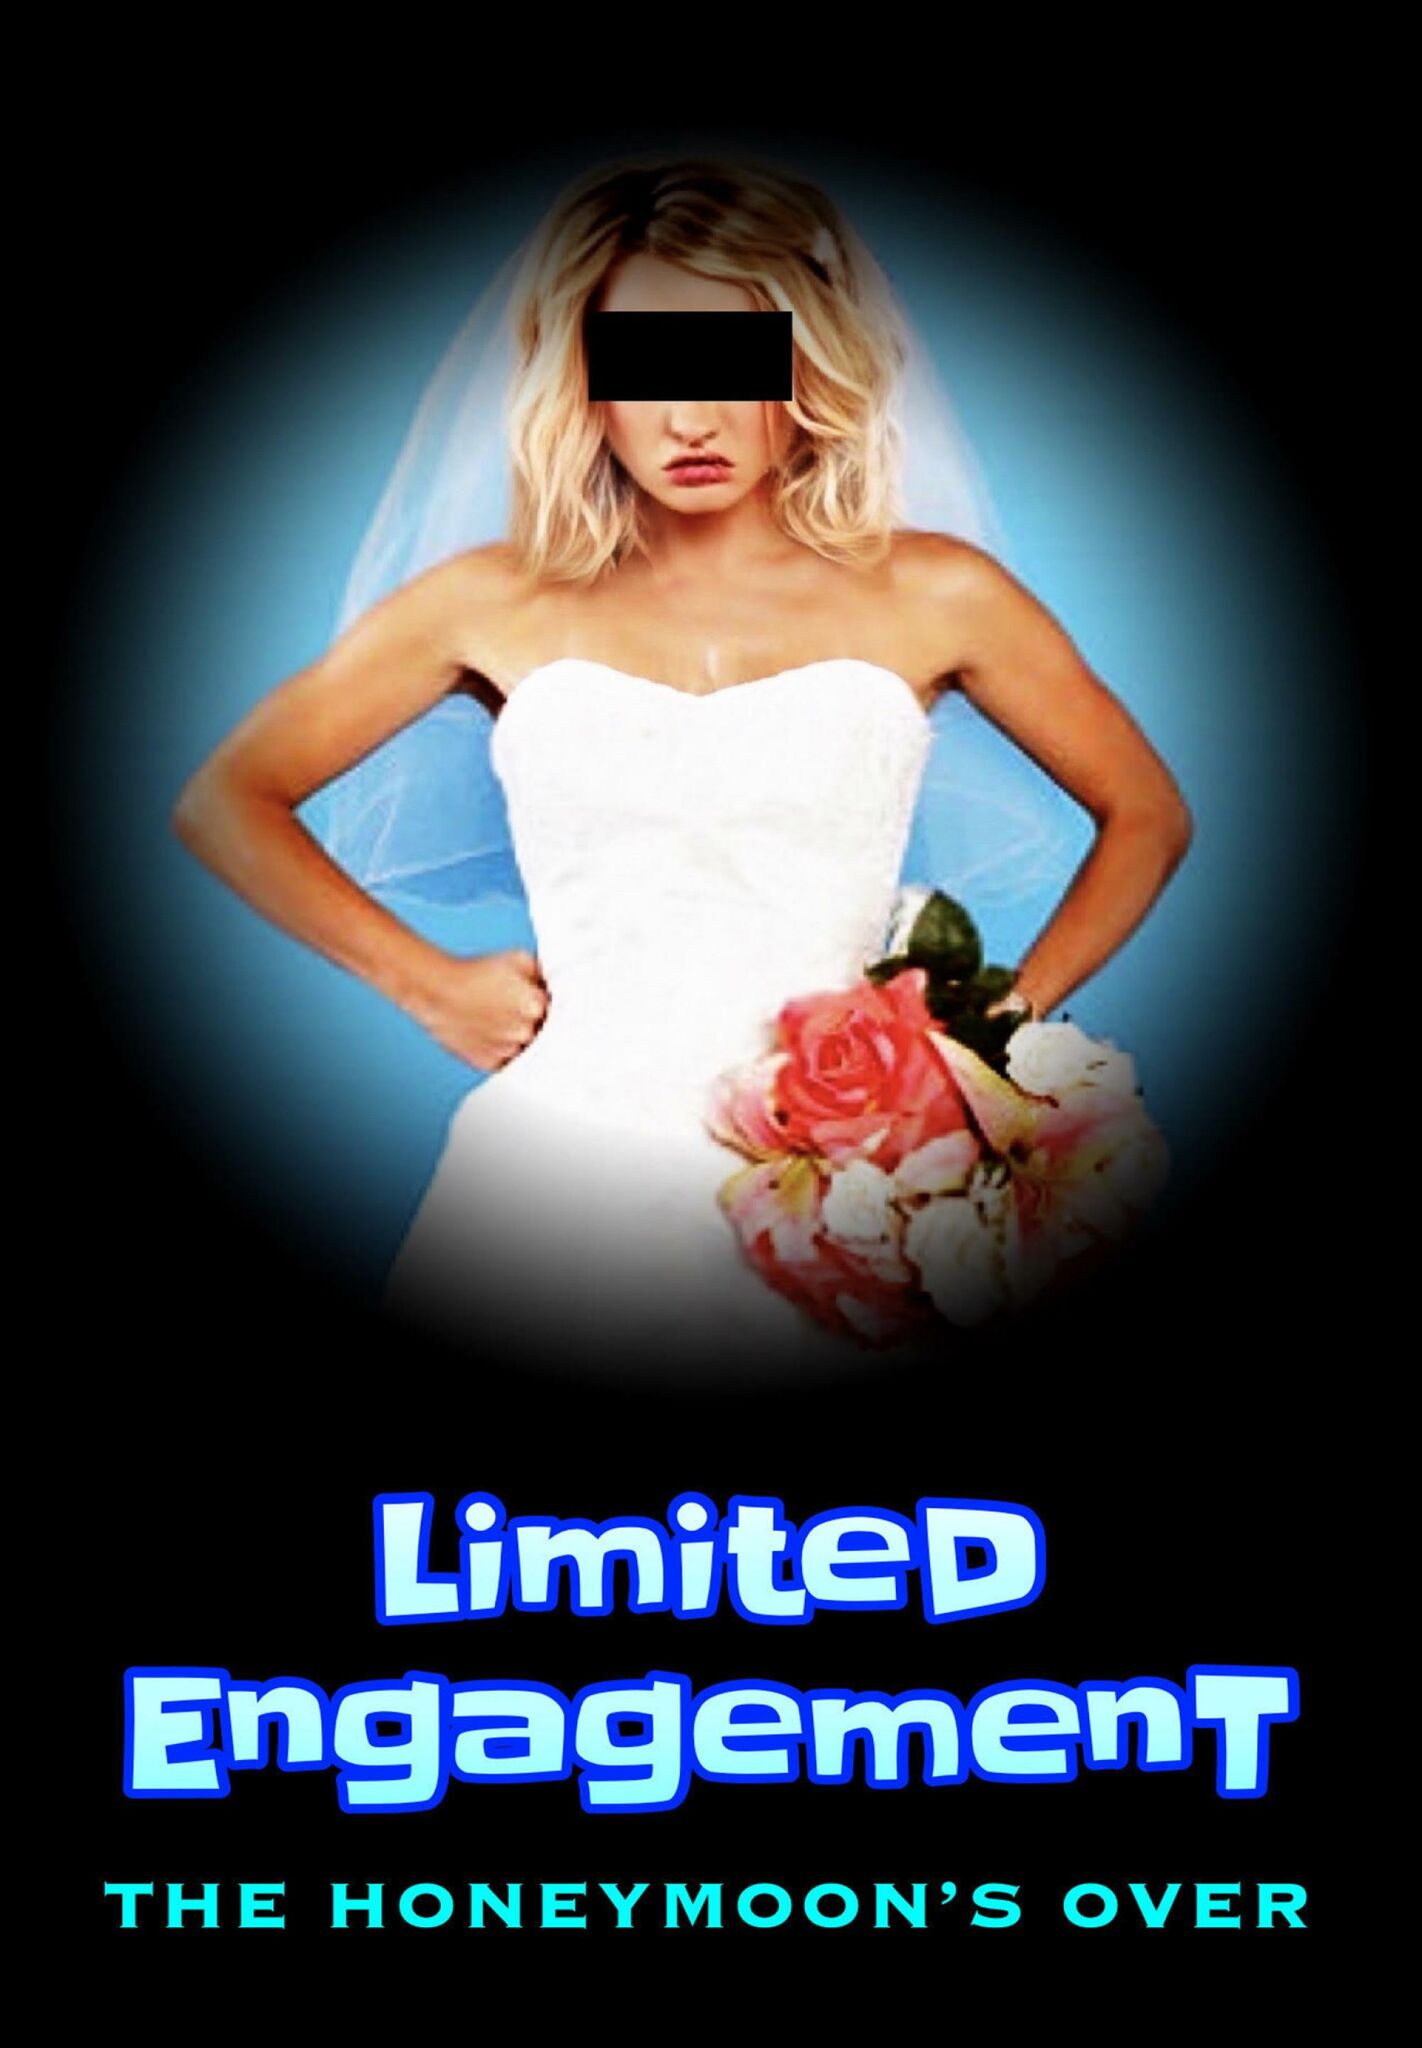 LIMITED ENGAGEMENT